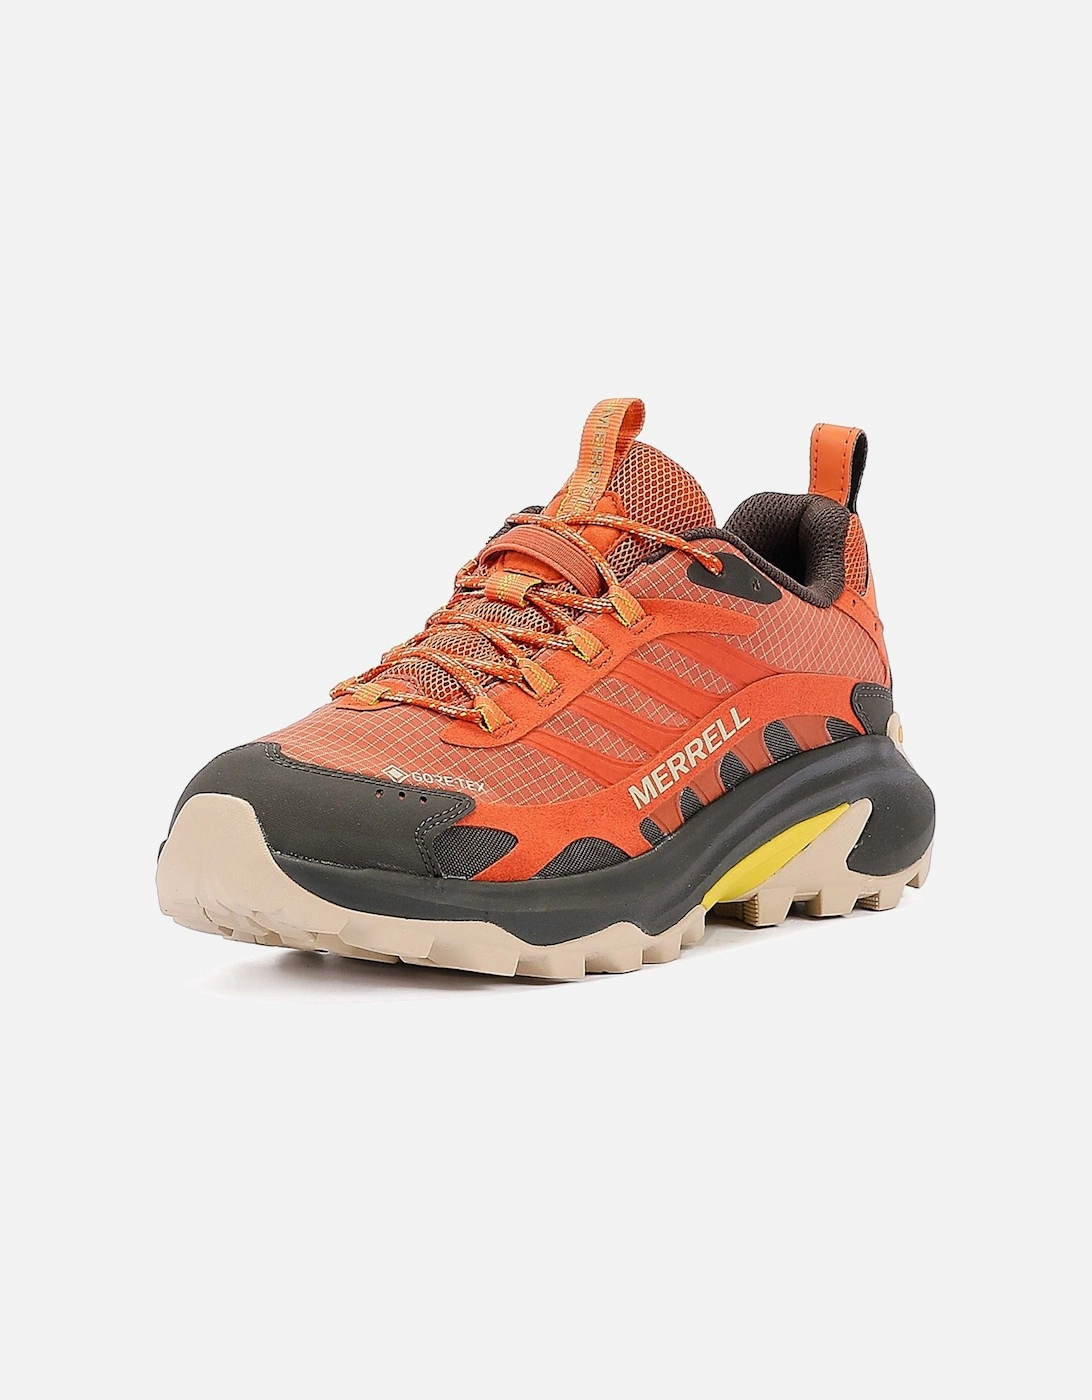 Moab Speed 2 Gore-Tex Men's Clay Trainers